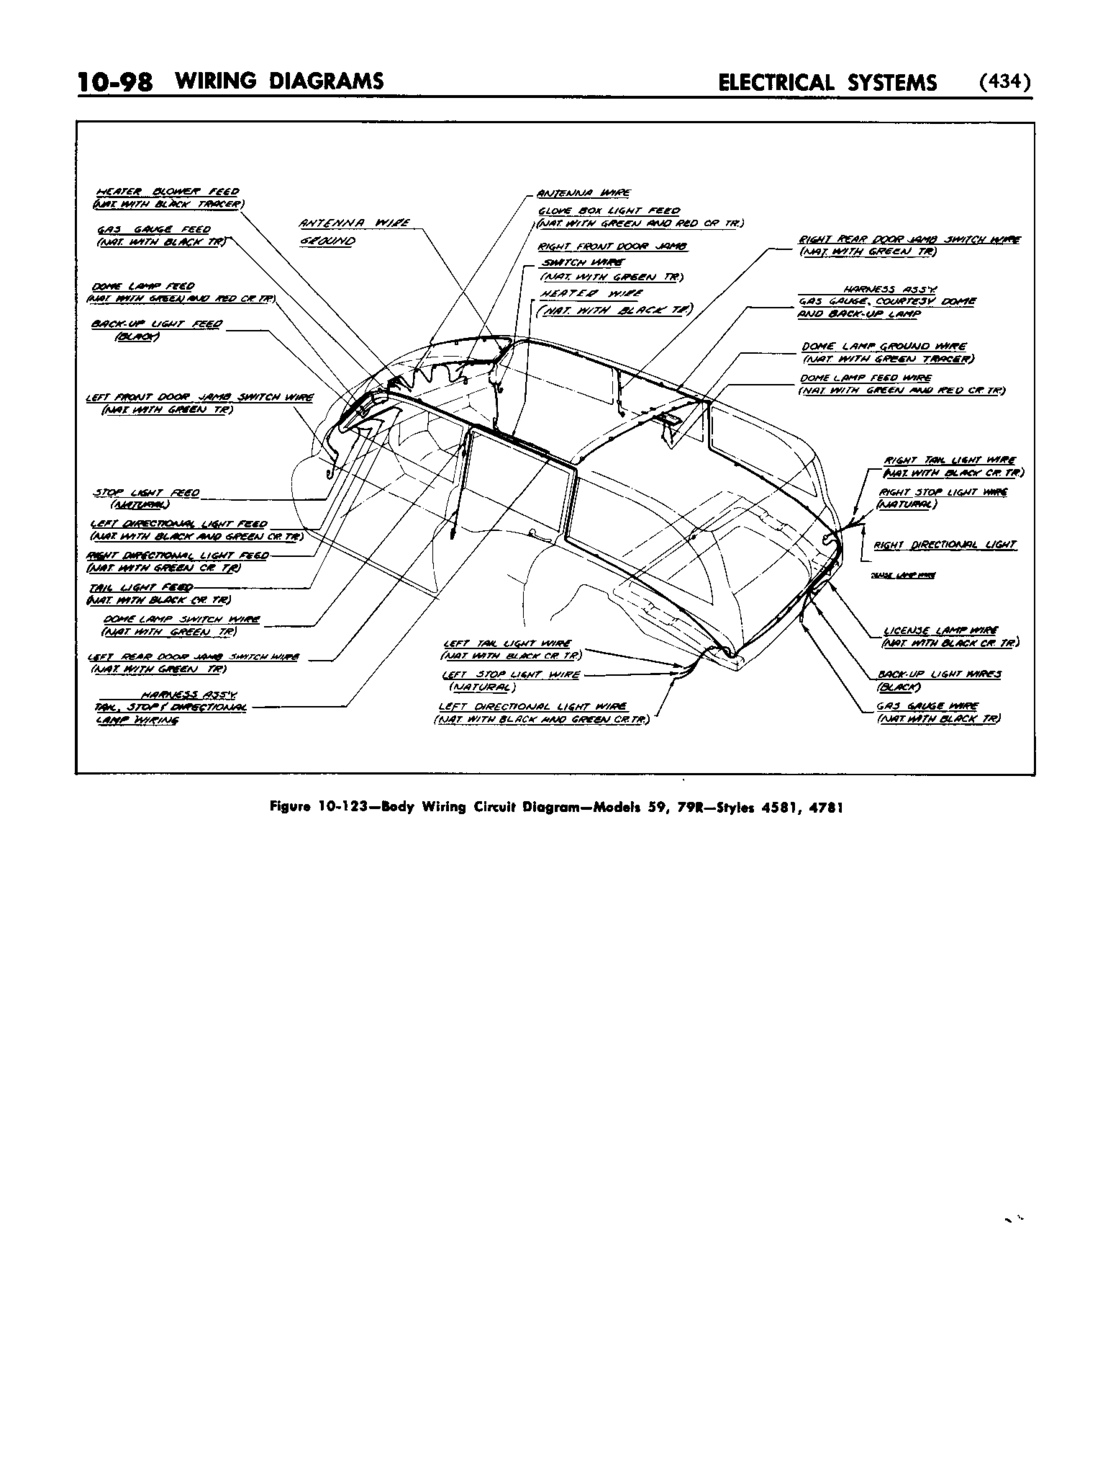 n_11 1952 Buick Shop Manual - Electrical Systems-098-098.jpg